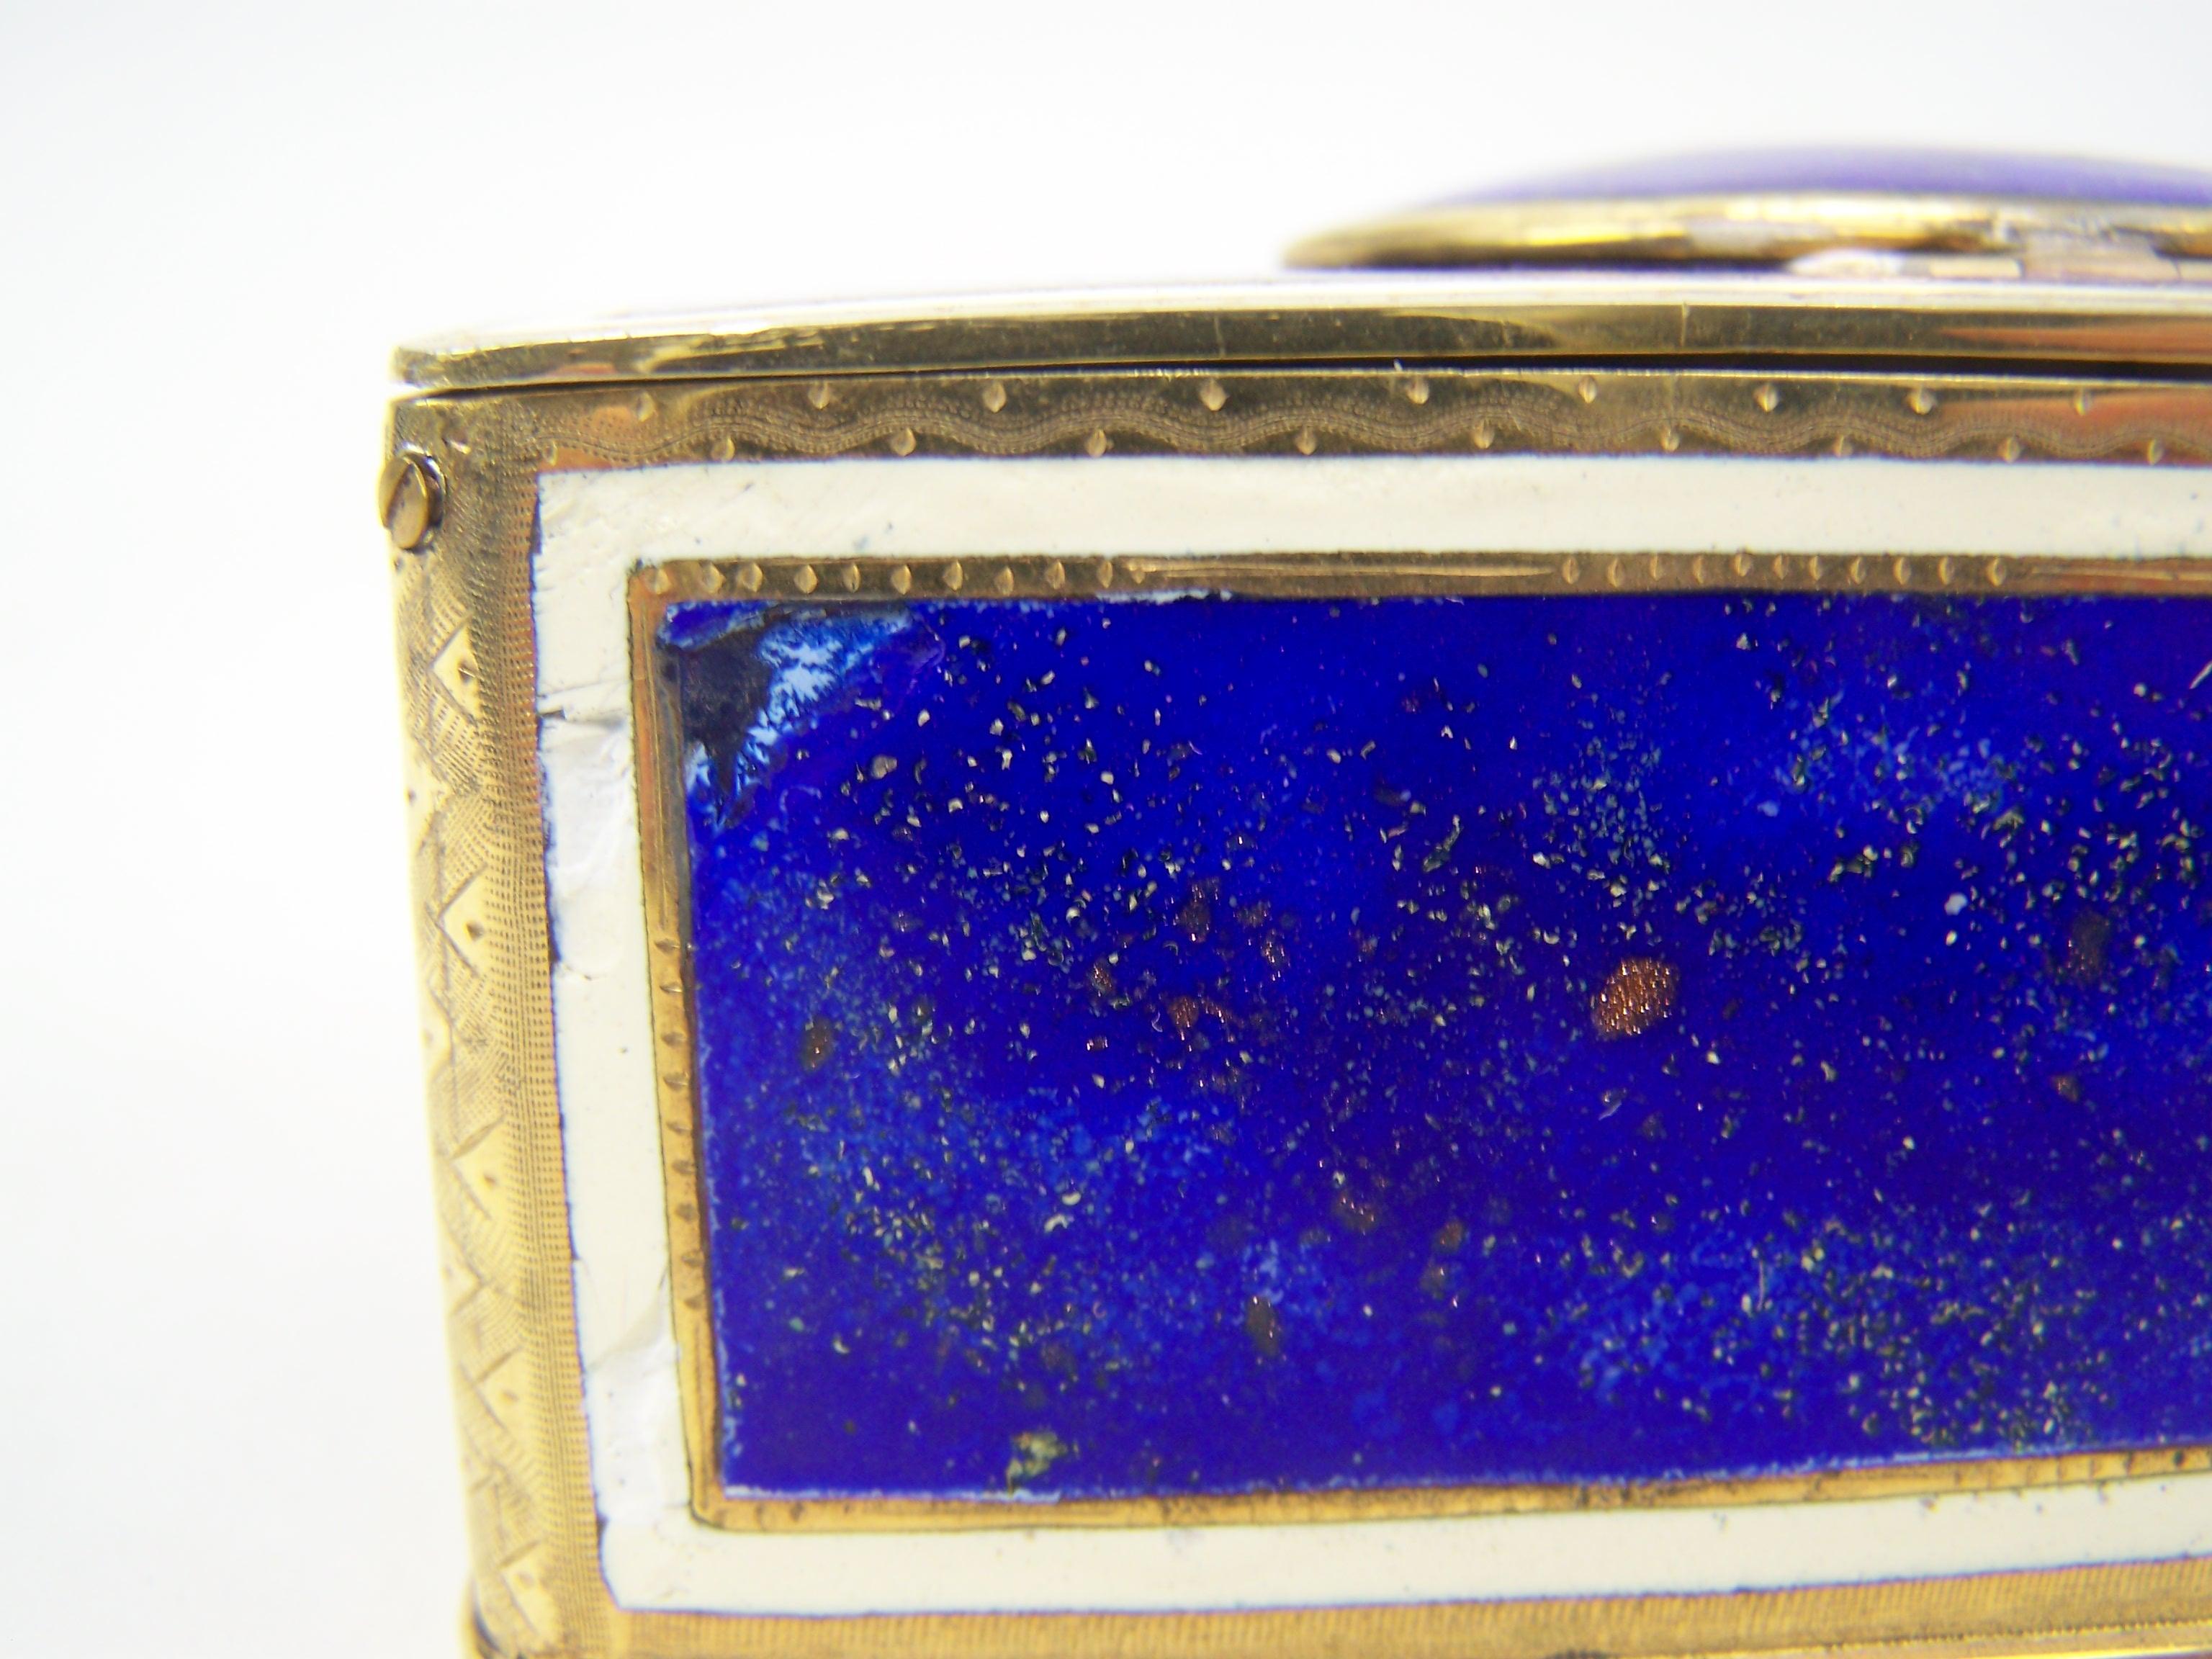 Late Victorian Singing bird box by K Griesbaum in guilded case and blue-goldflaked enamel